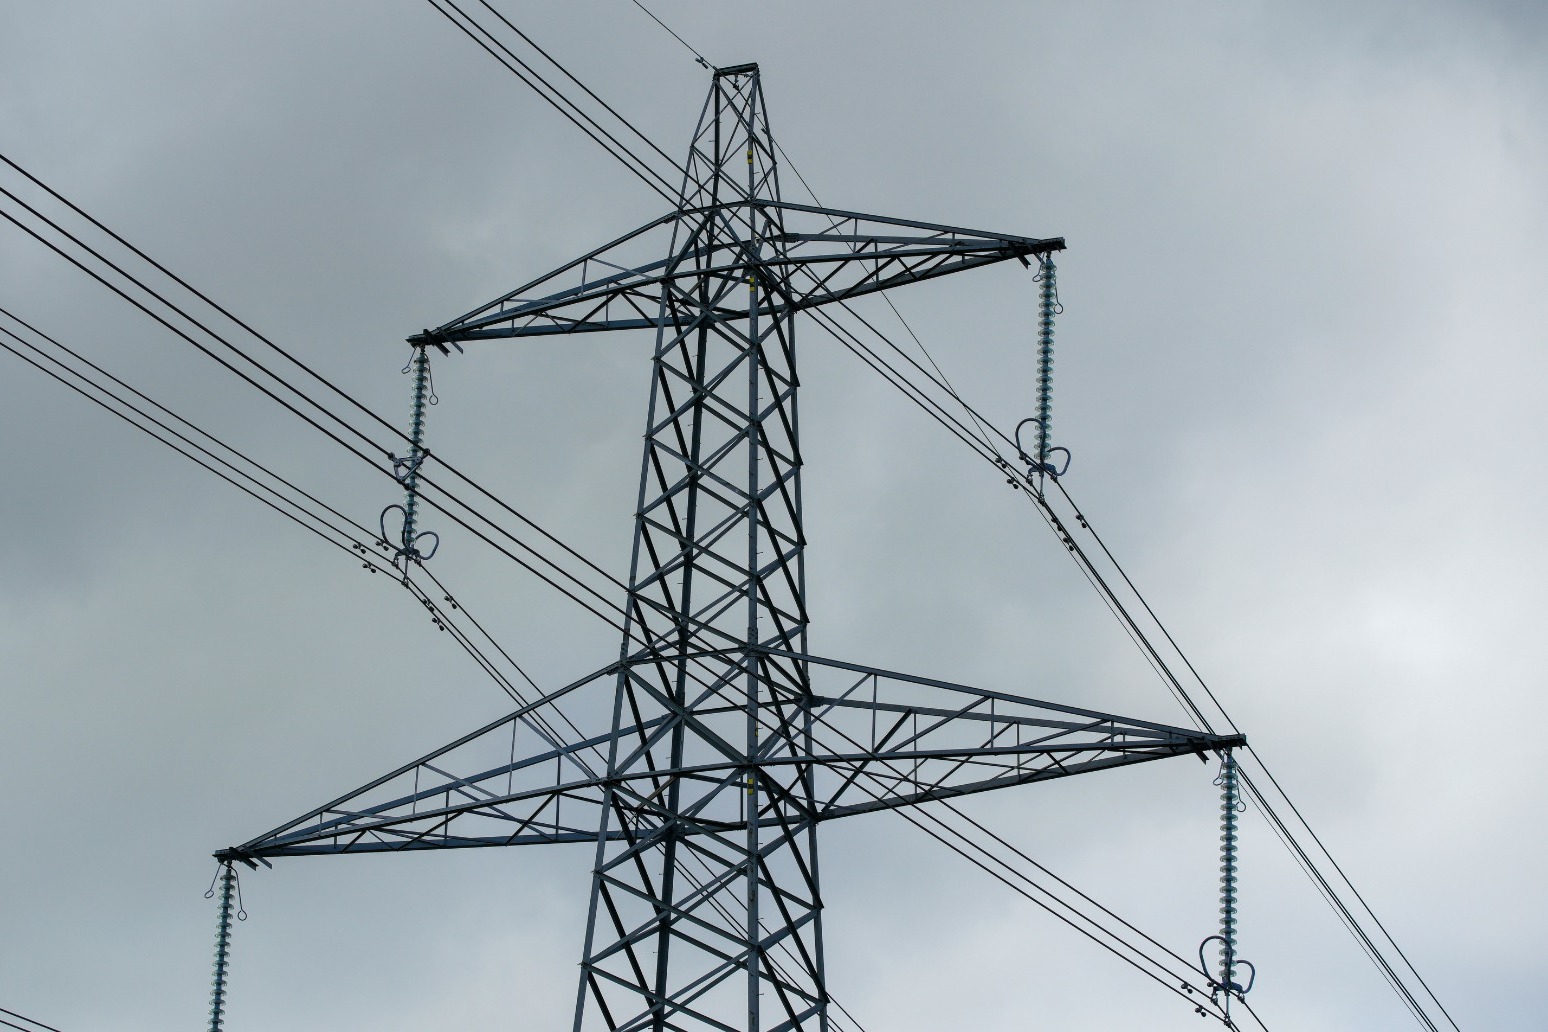 Electricity margins could be ‘tight’ this winter, grid firm says 